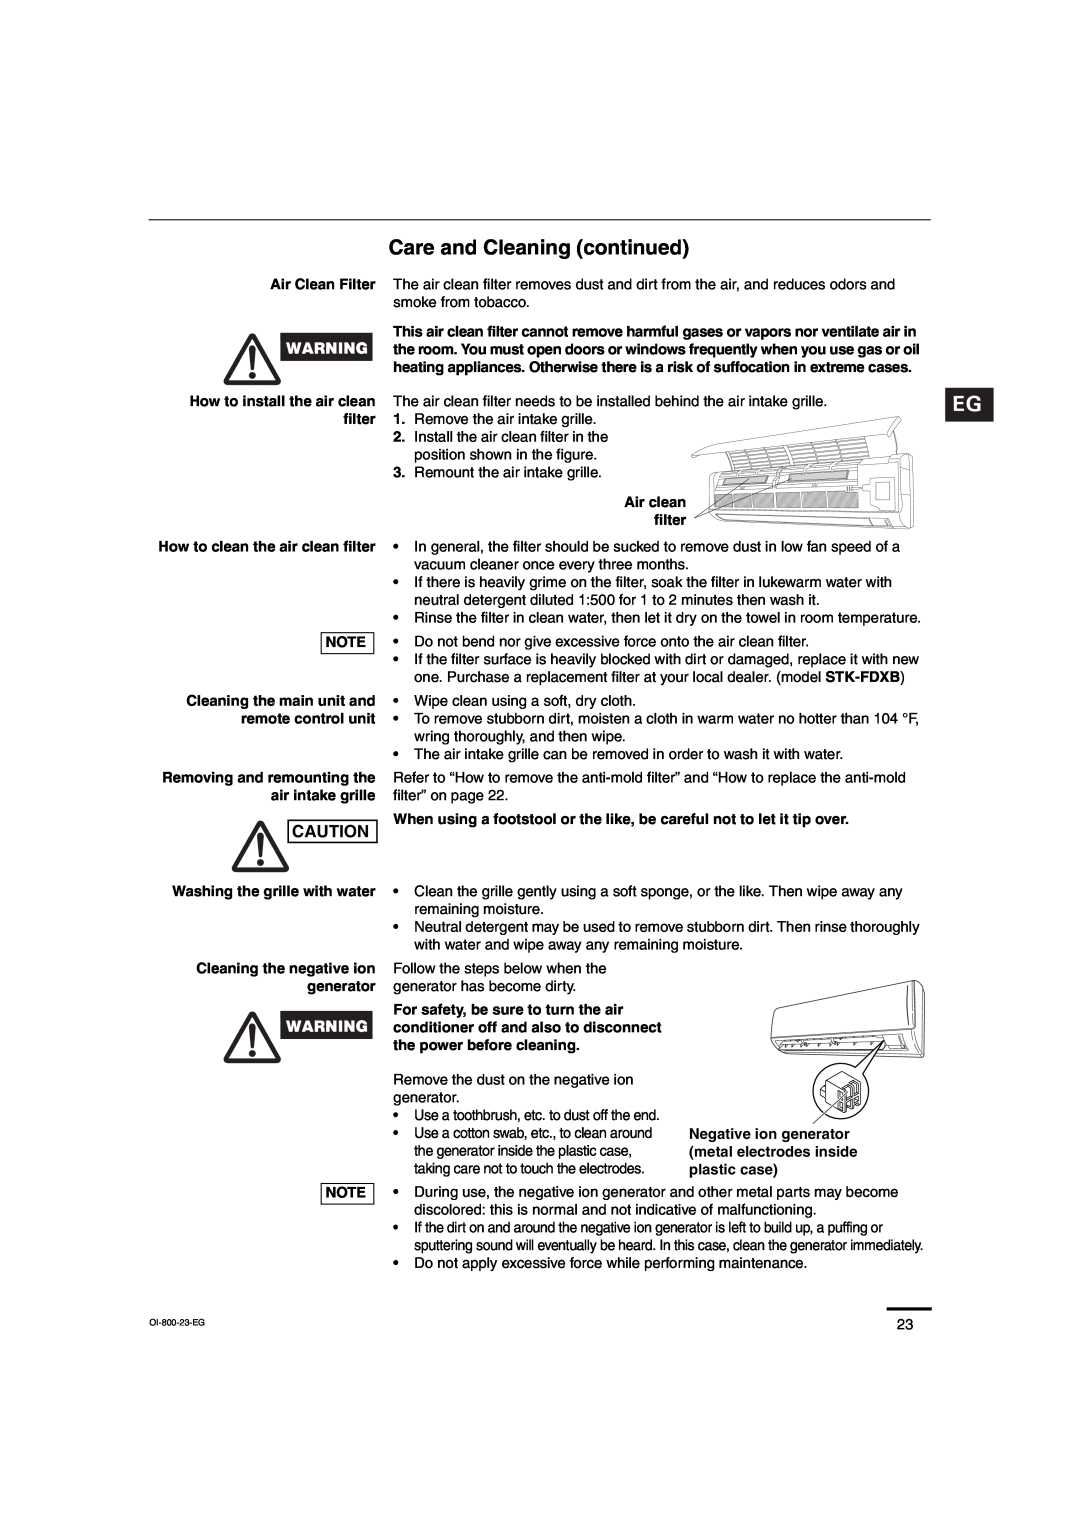 Sanyo CL2472, C2472, C1872, CL1872 service manual Care and Cleaning continued, Air Clean Filter 